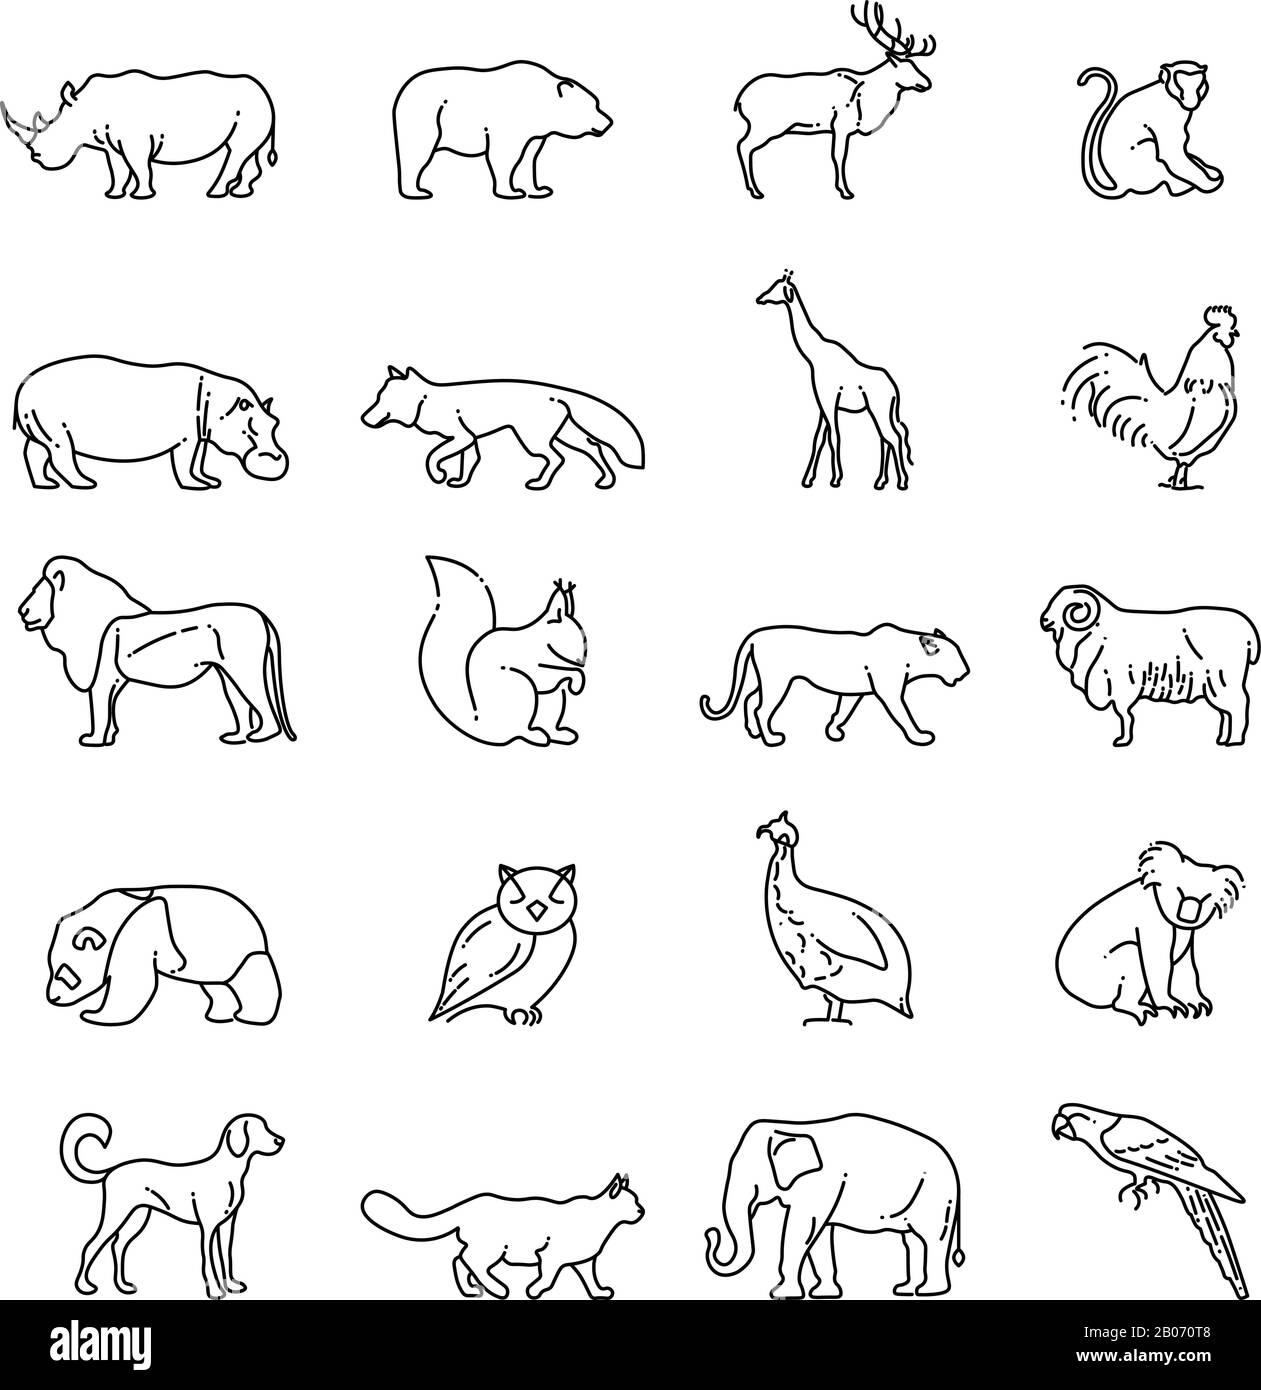 Animals thin line vector icons. Giraffe and tiger, sheep and koala in linear style illustration Stock Vector